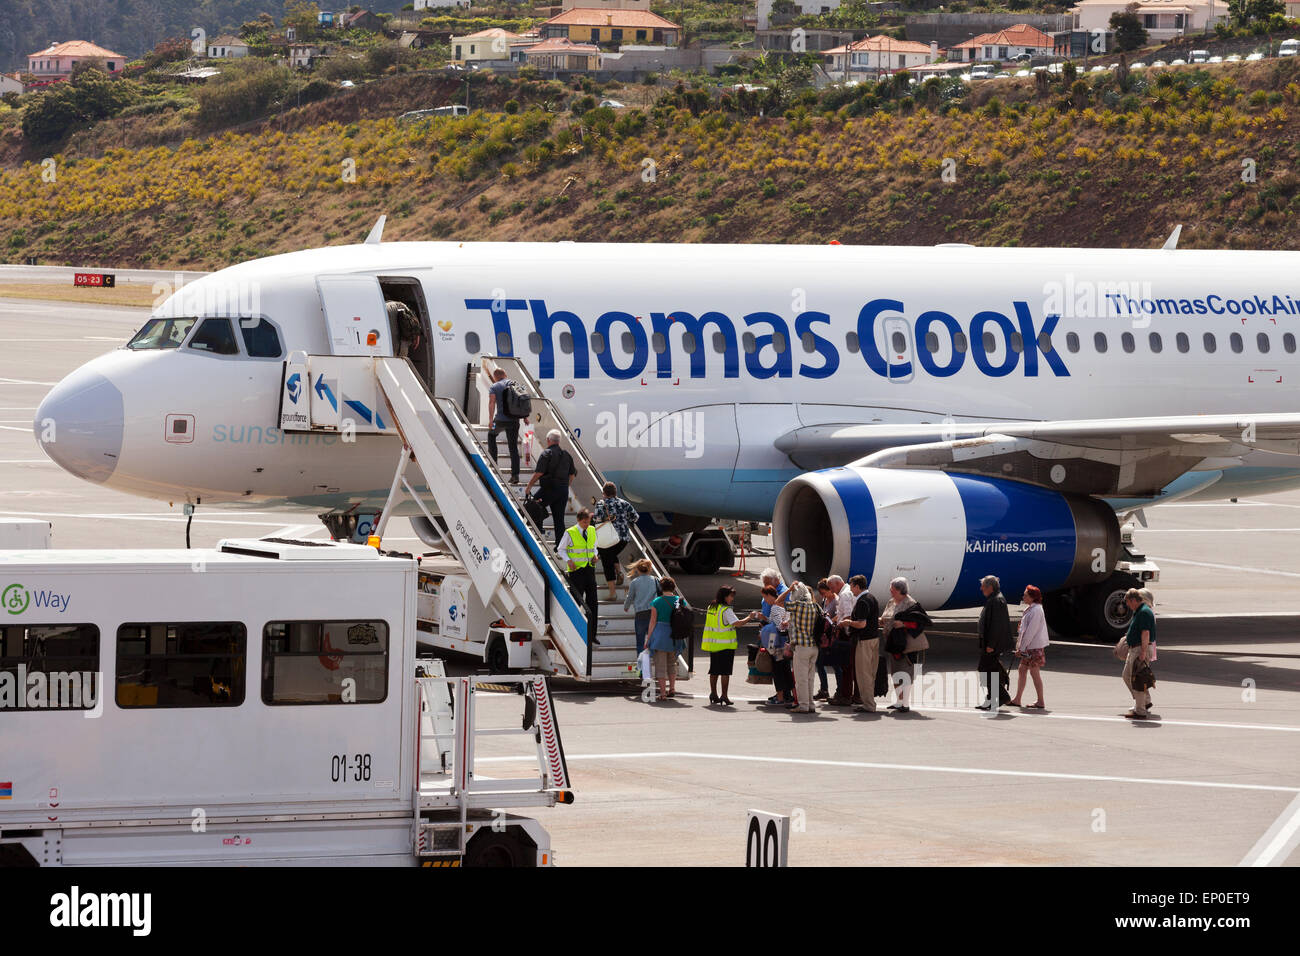 Passengers boarding a Thomas Cook Airlines Airbus A319-100 plane at Funchal airport, Madeira, Europe Stock Photo